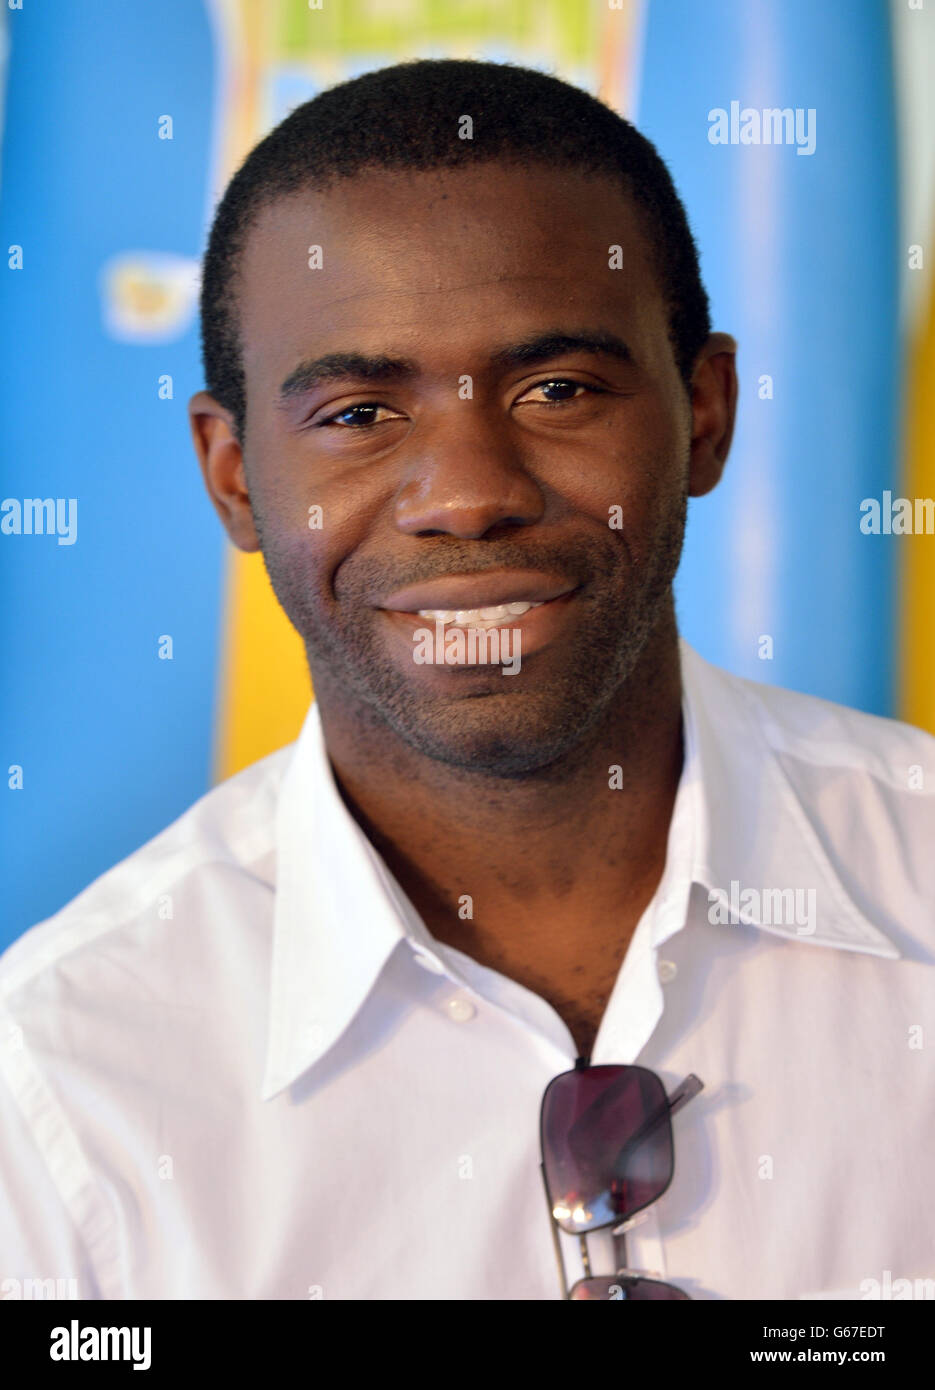 Fabrice Muamba attends the UK screening at Southbank, London, of the Disney Channel Original Movie, Teen Beach Movie, which premieres on the Disney Channel UK on 19th July at 6pm. Stock Photo